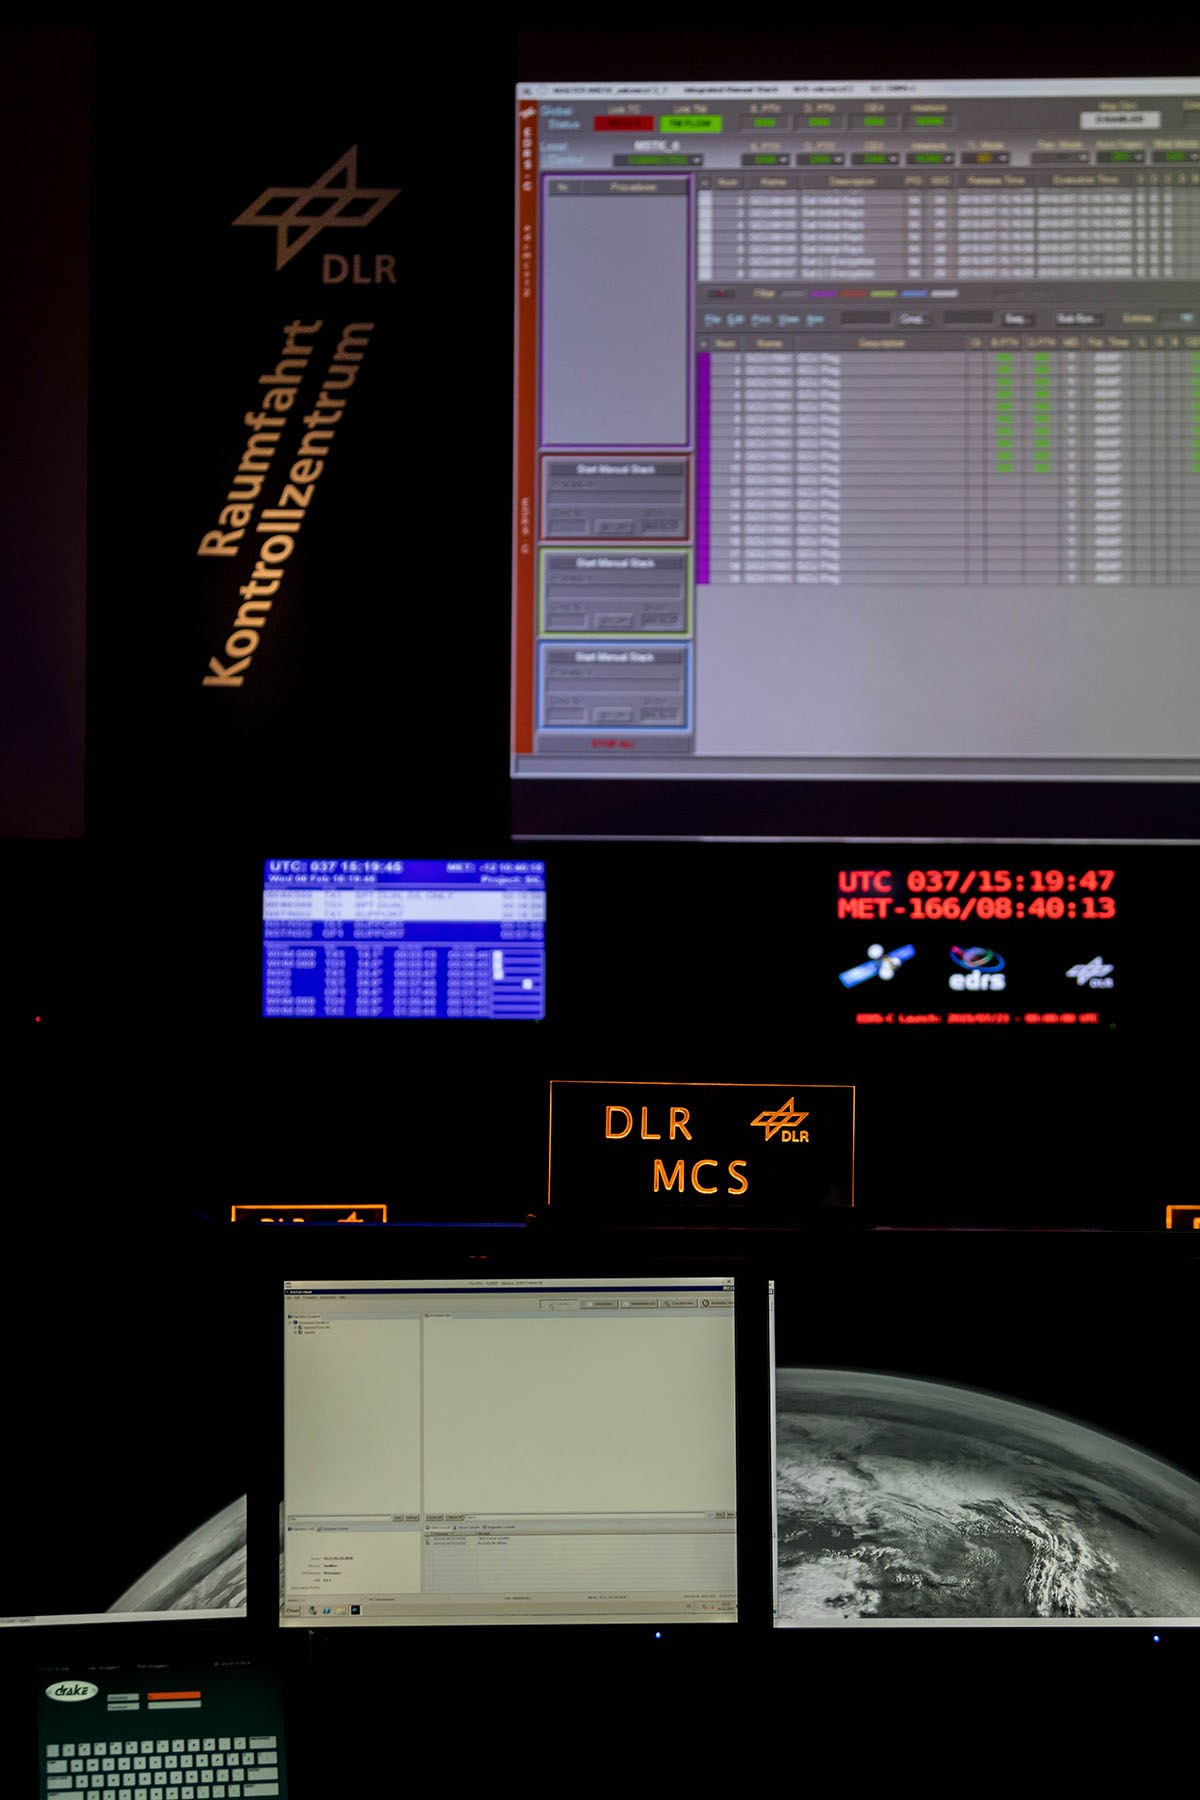 The 'Monitoring and Control System' at the German Space Operations Center